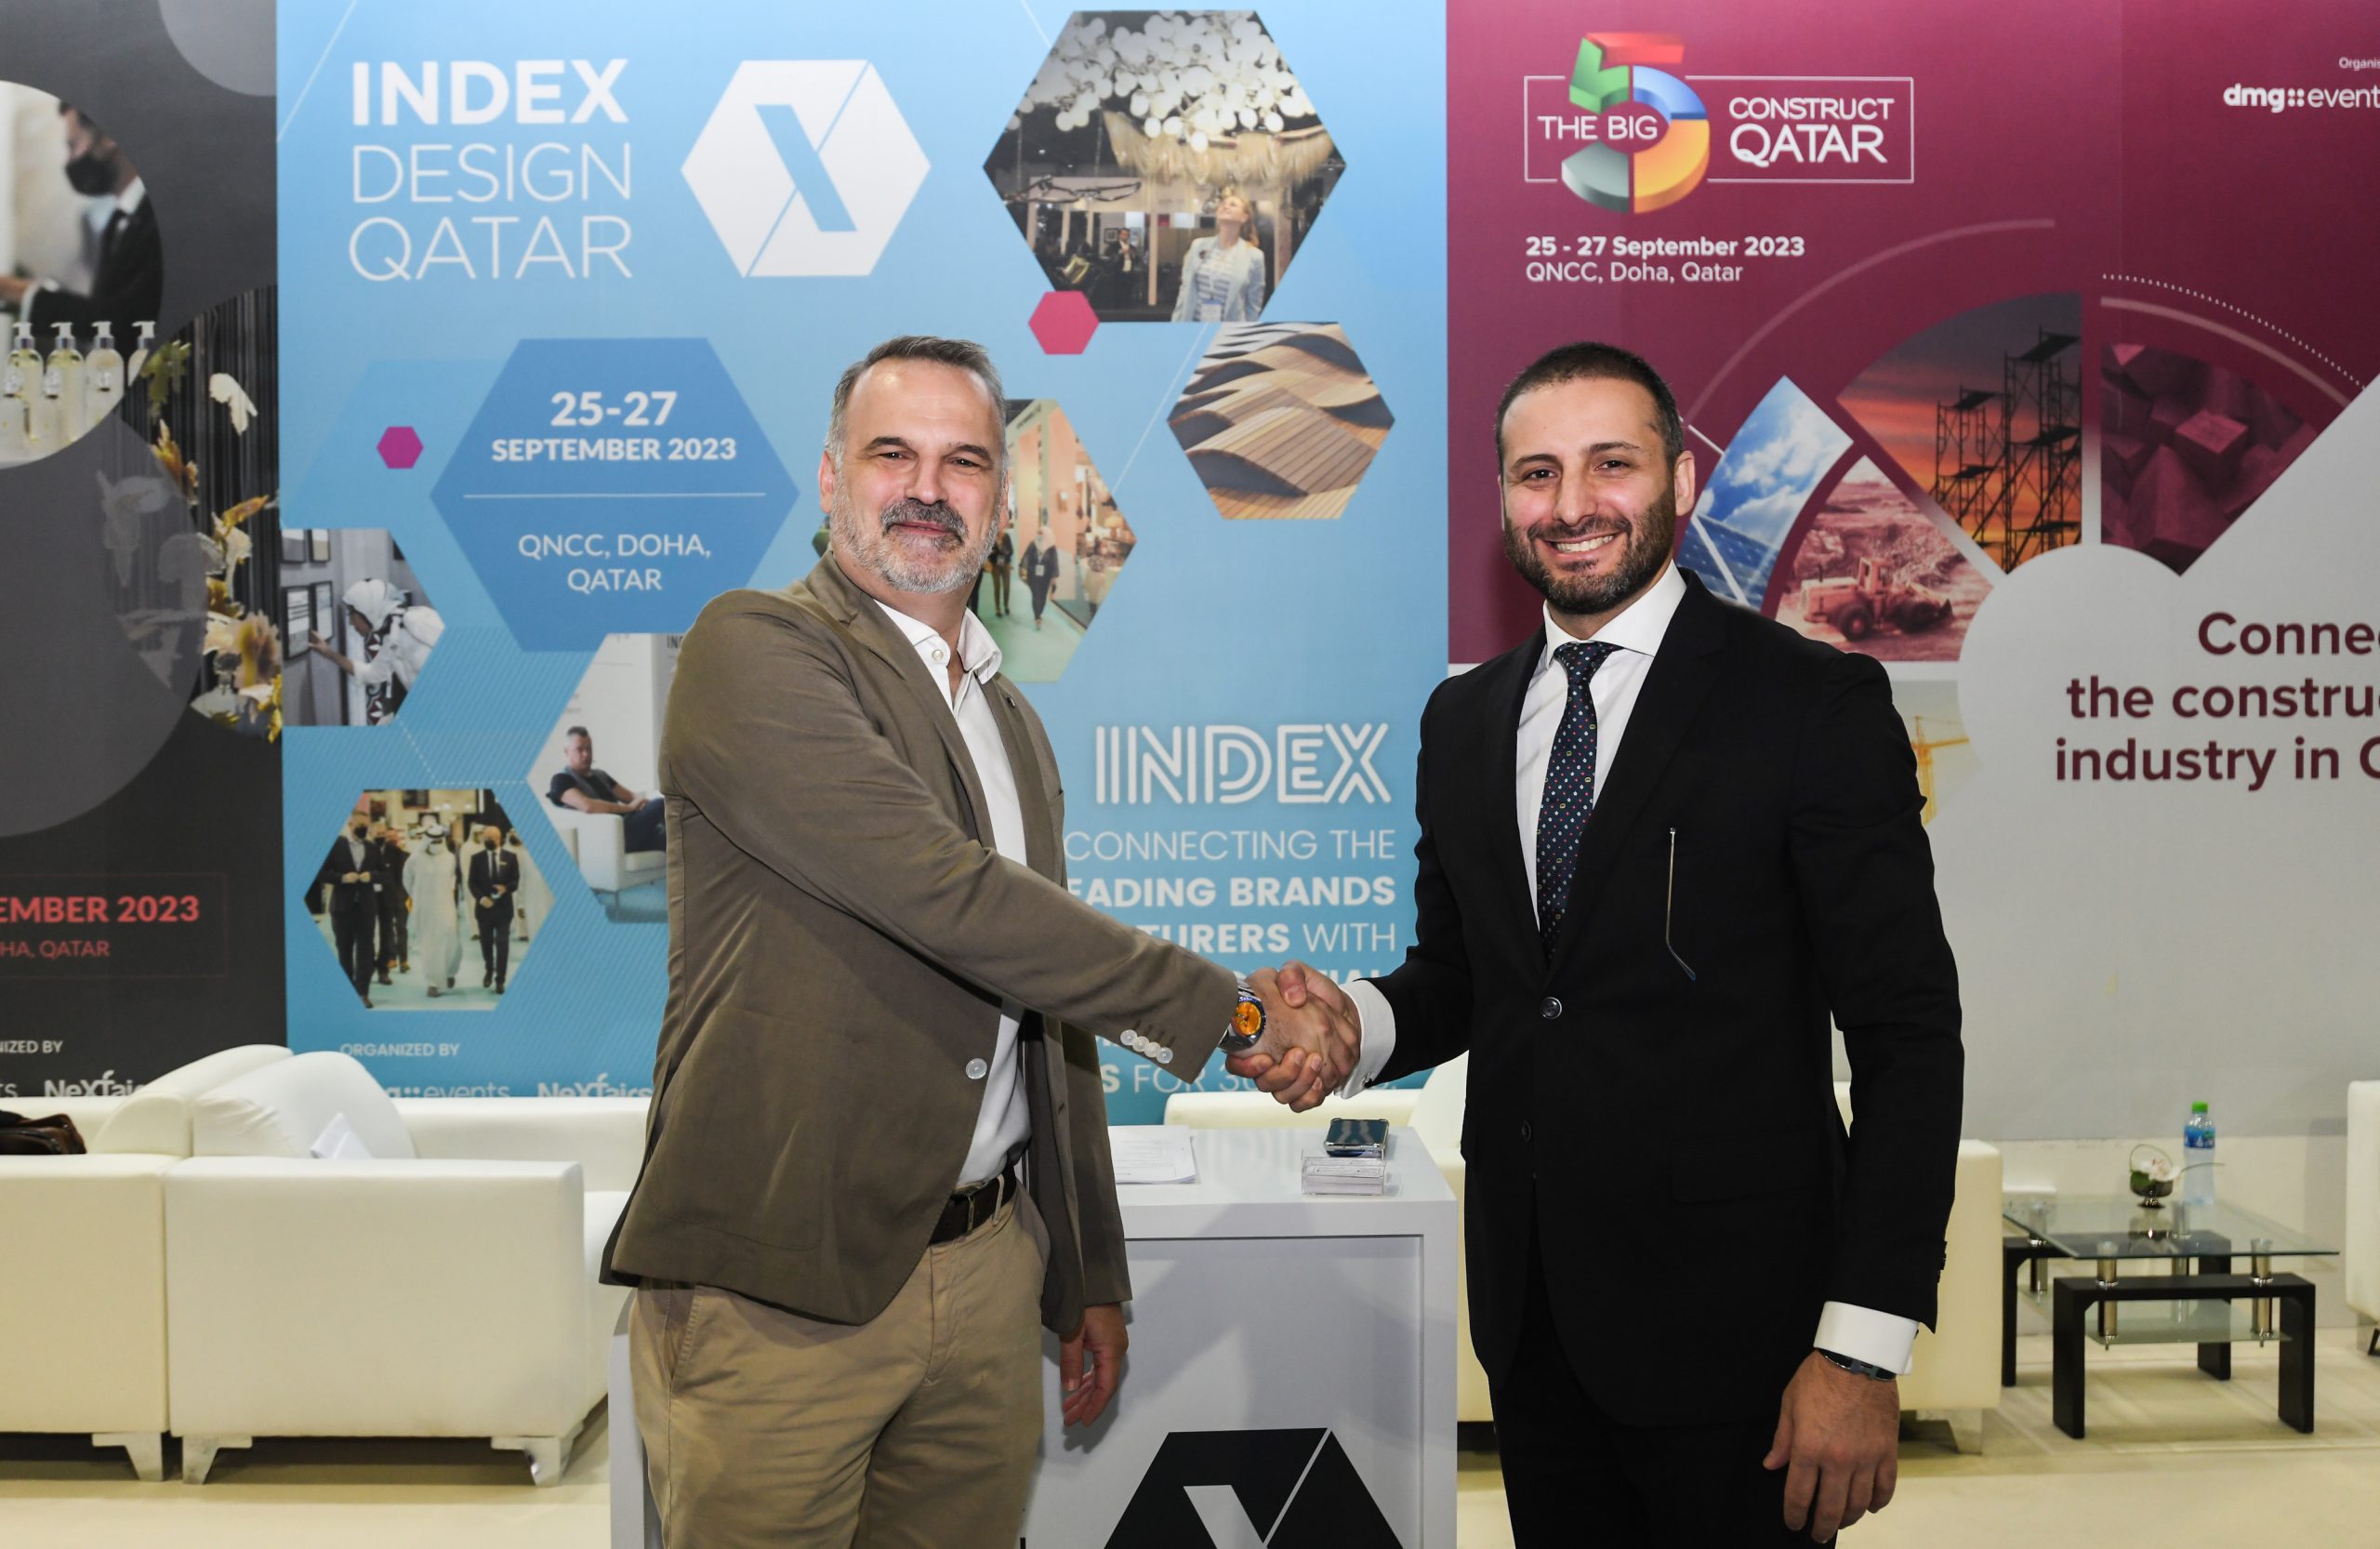 The Big 5 and INDEX will return to Qatar in 2023